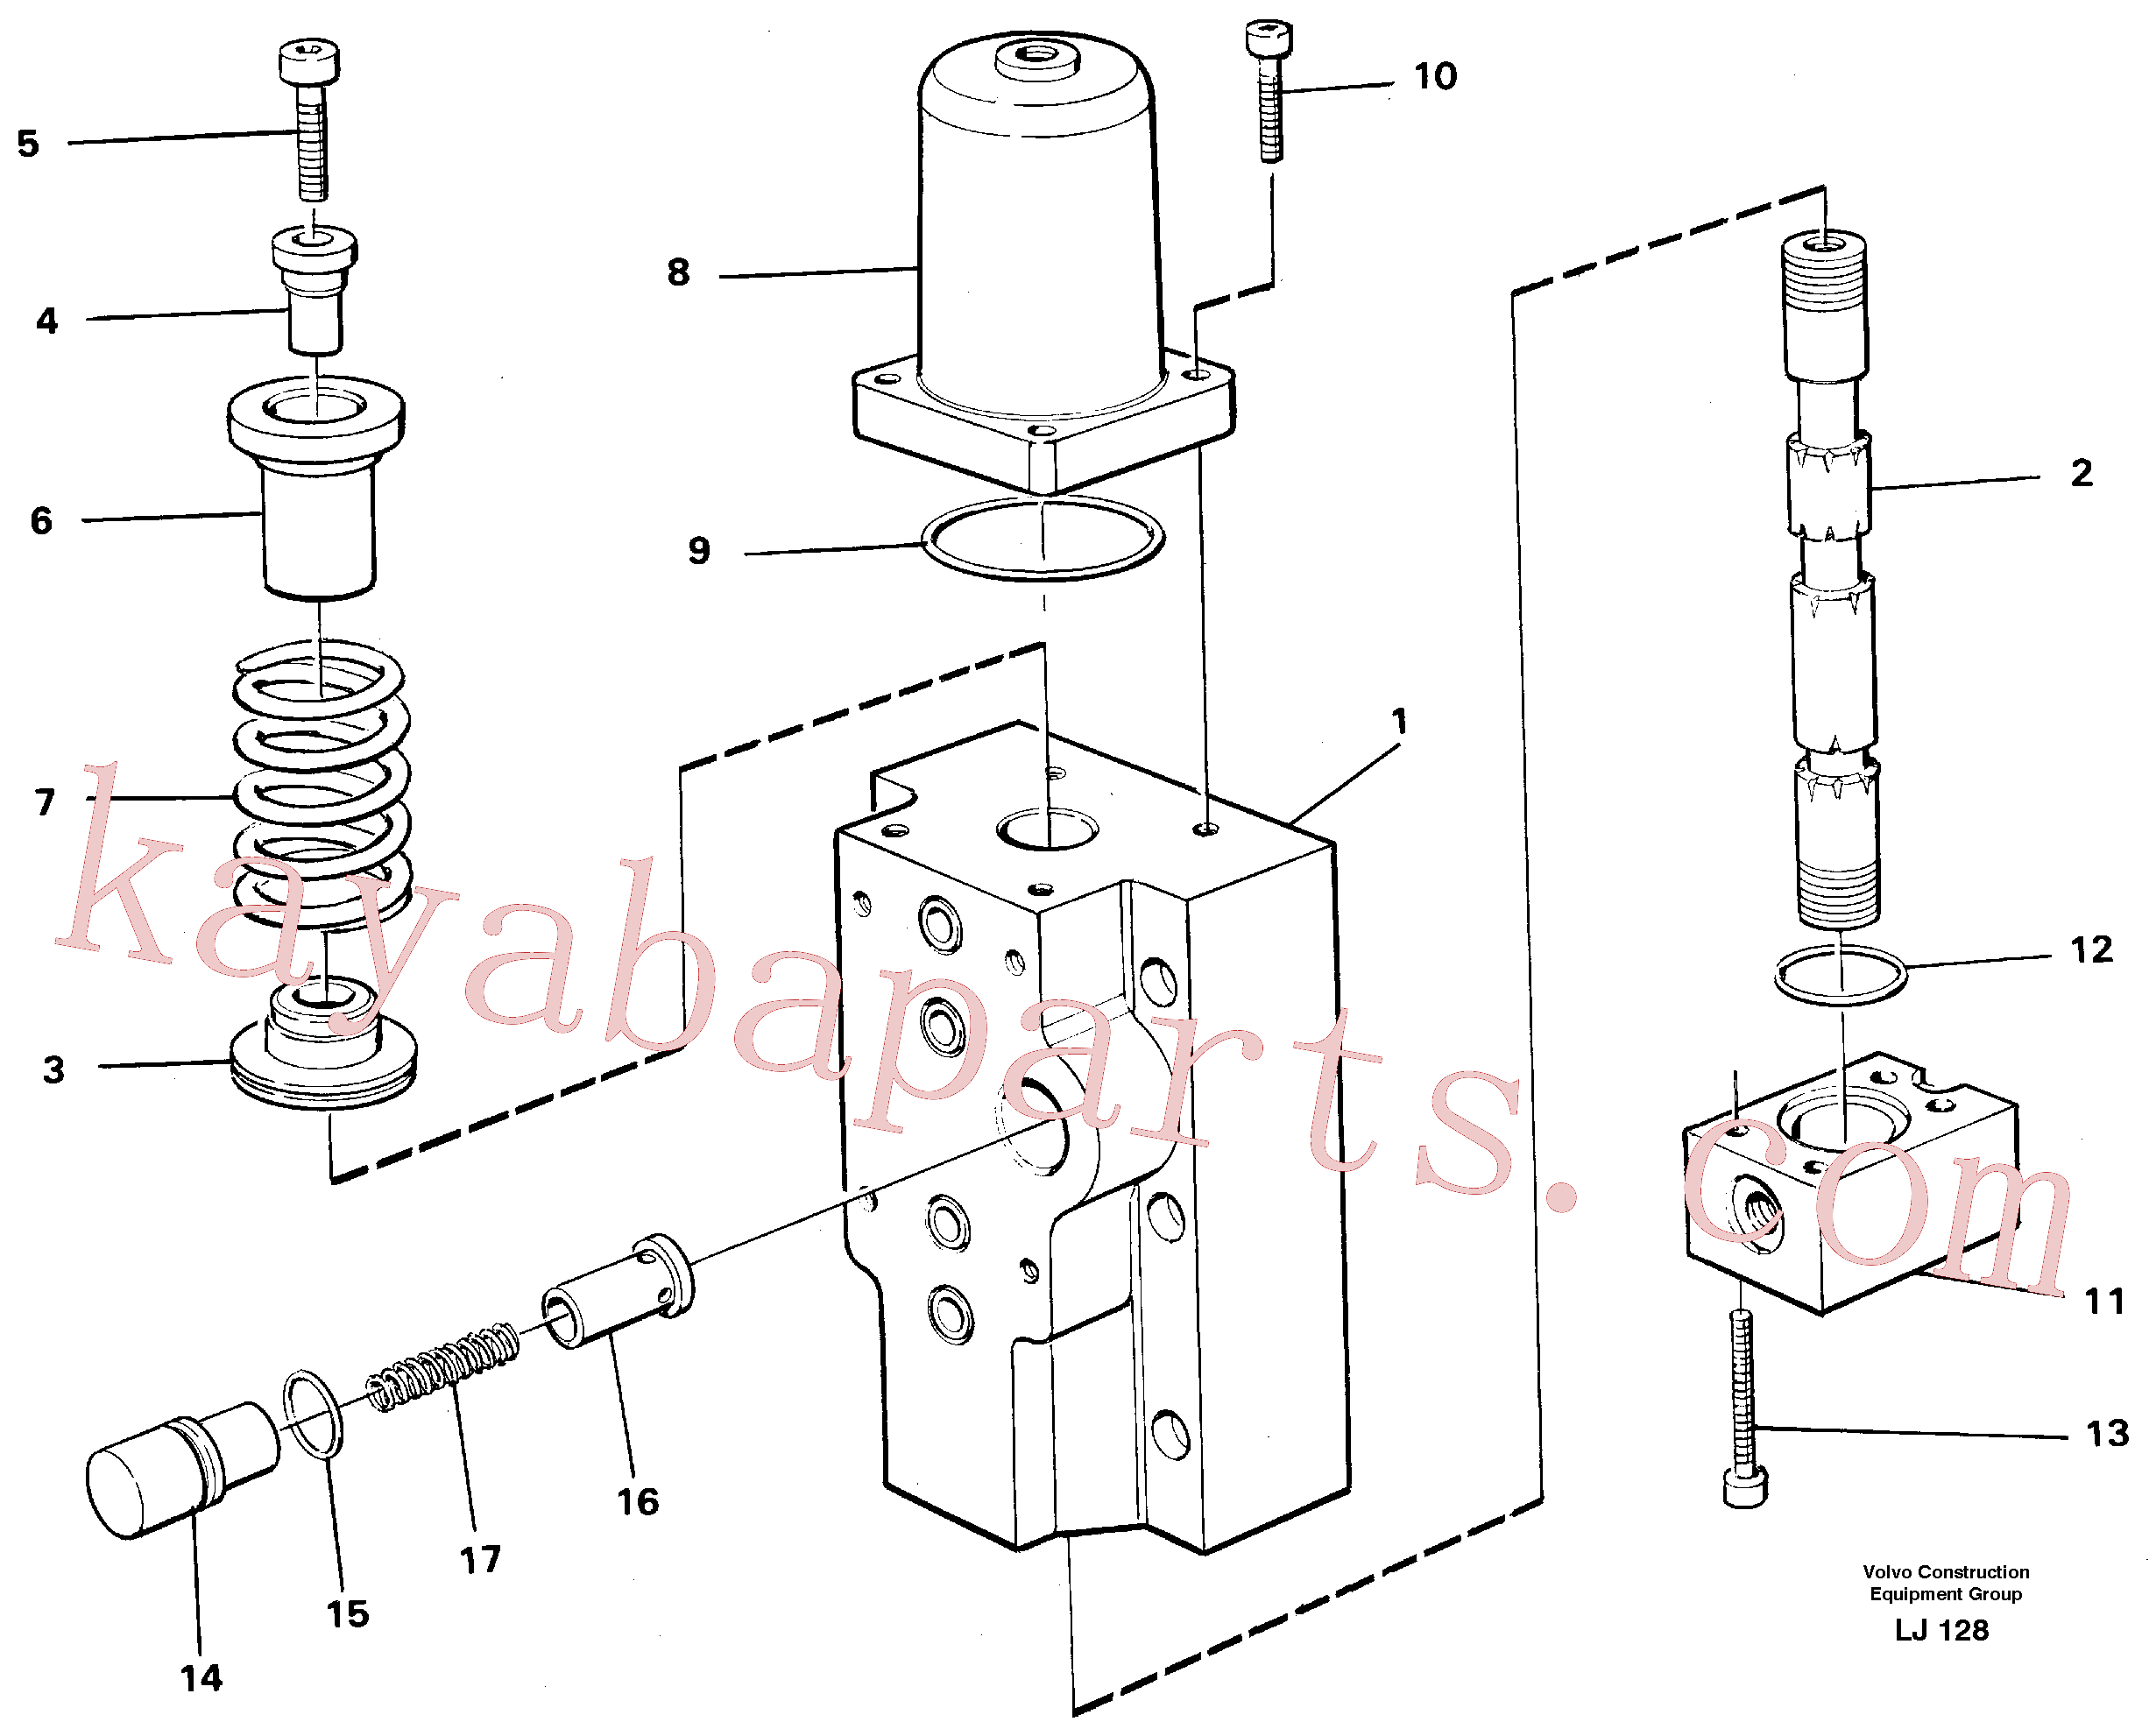 VOE14258011 for Volvo Four-way valves Primary, Four-way valve for hammer/shears(LJ128 assembly)